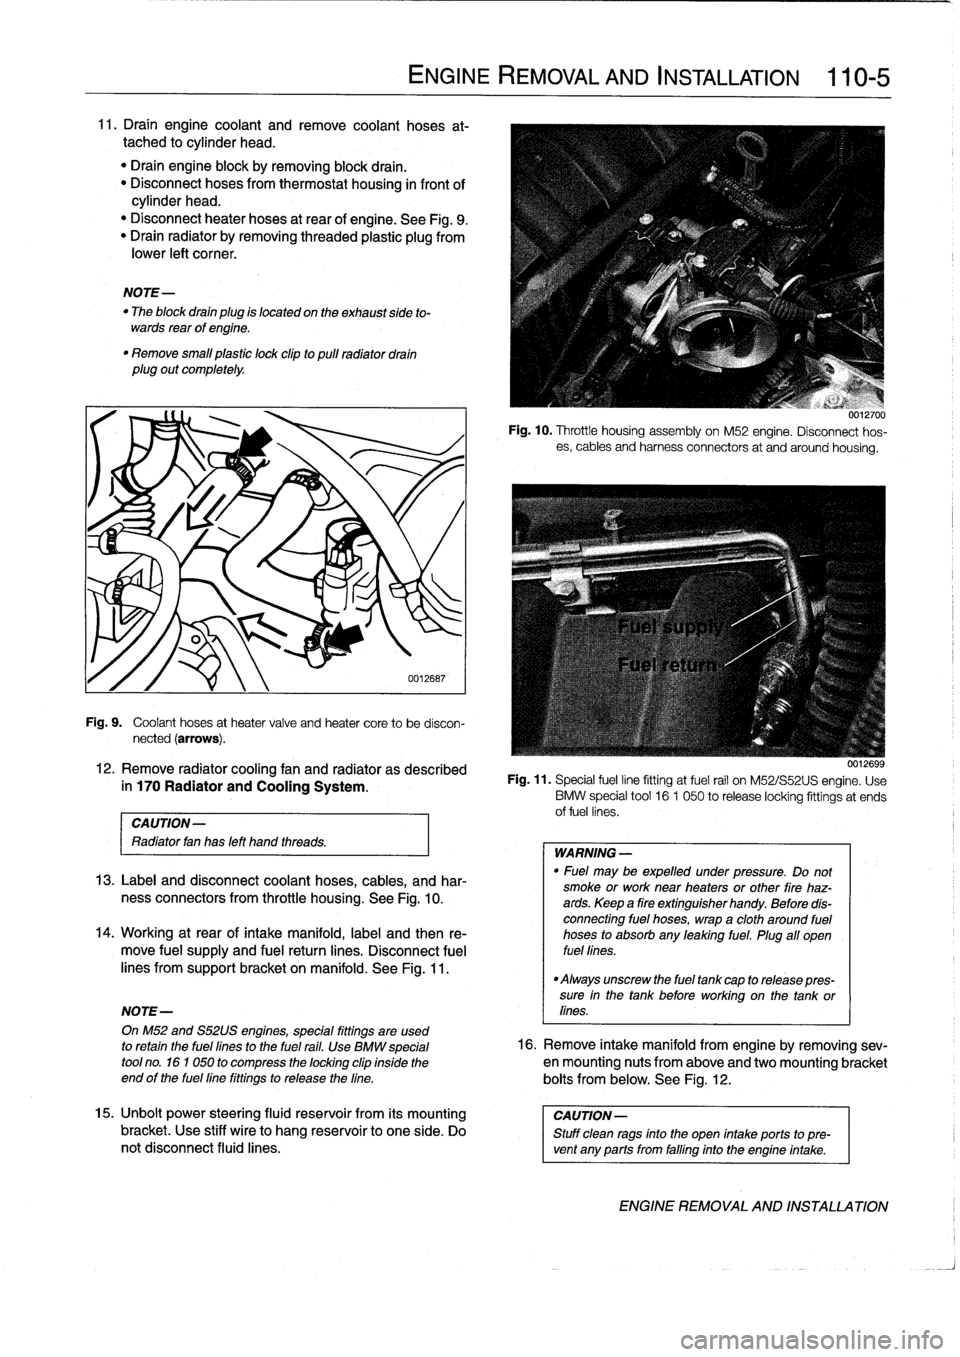 BMW 318i 1995 E36 Workshop Manual 
11
.
Draín
engine
coolant
and
Rmove
coolant
hoses
at-
tached
to
cylinder
head
.

"
Drain
engine
block
byremoving
block
drain
.
"
Disconnect
hoses
from
thermostat
housing
in
front
of
cylinder
head
.
